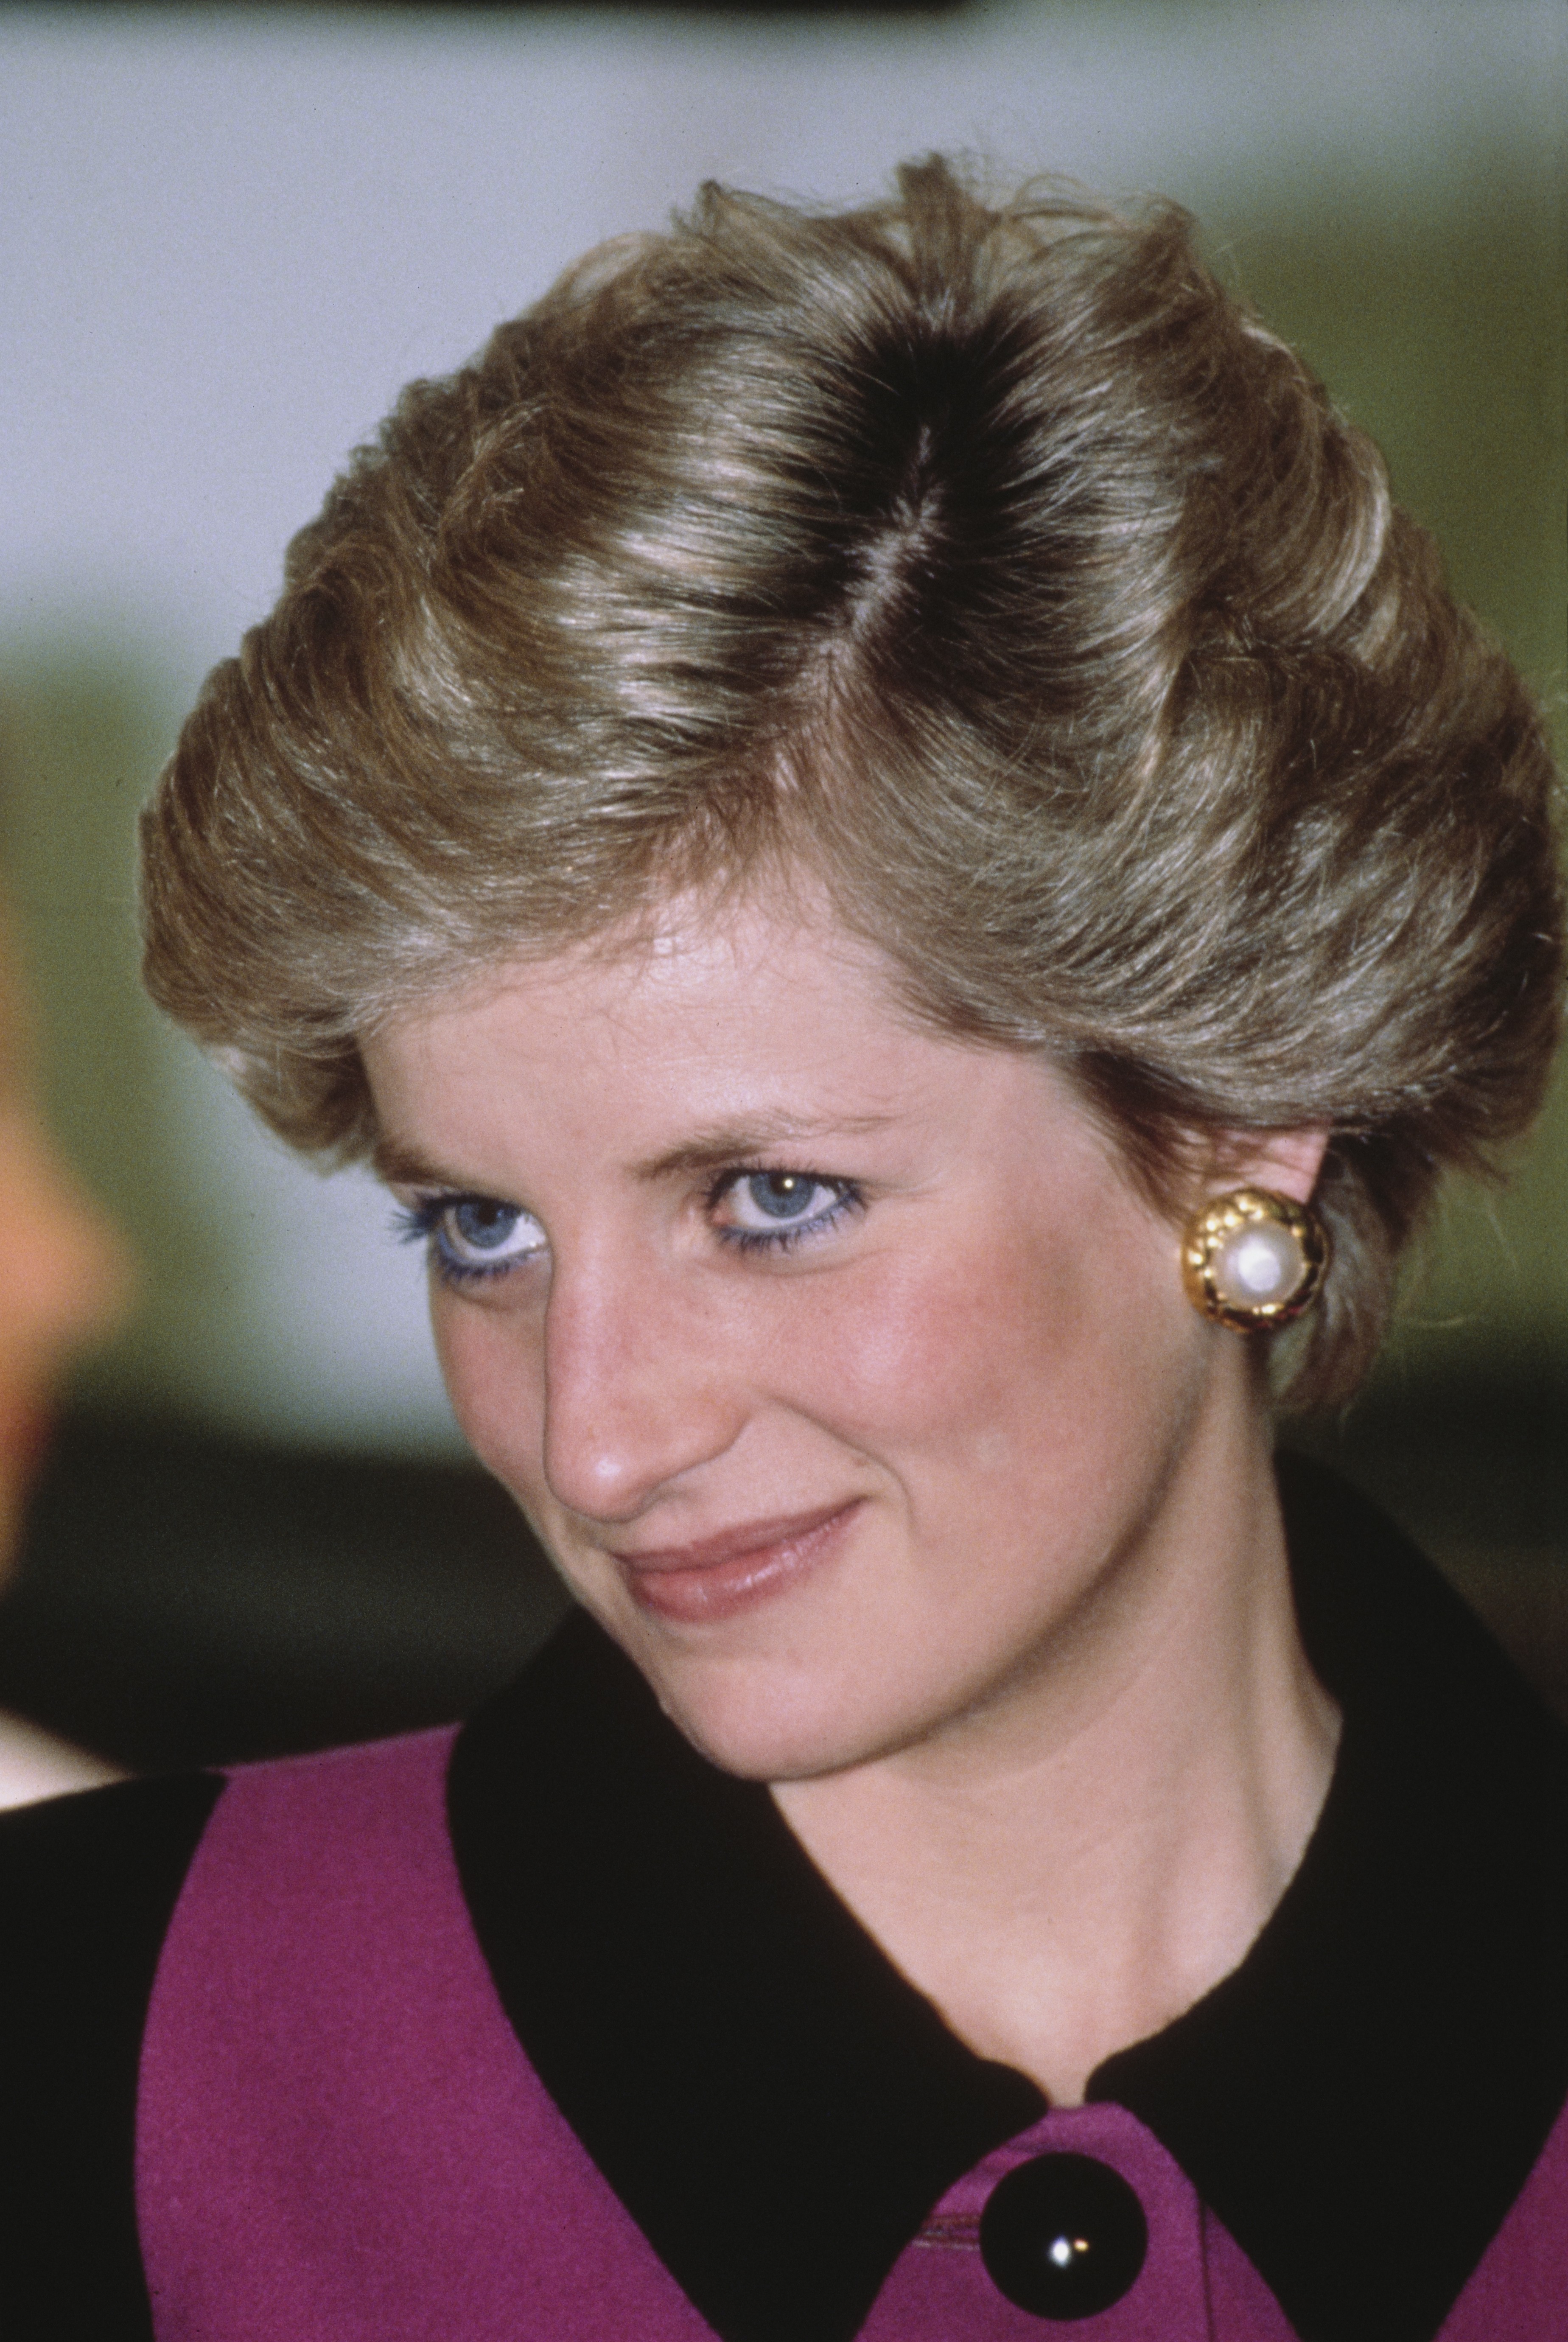 Diana, Princess of Wales (1961 - 1997) wearing a suit by Catherine Walker to an exhibition at Olympia in London, 29th January 1990. (Photo by Princess Diana Archive/Getty Images) (Foto: Getty Images)